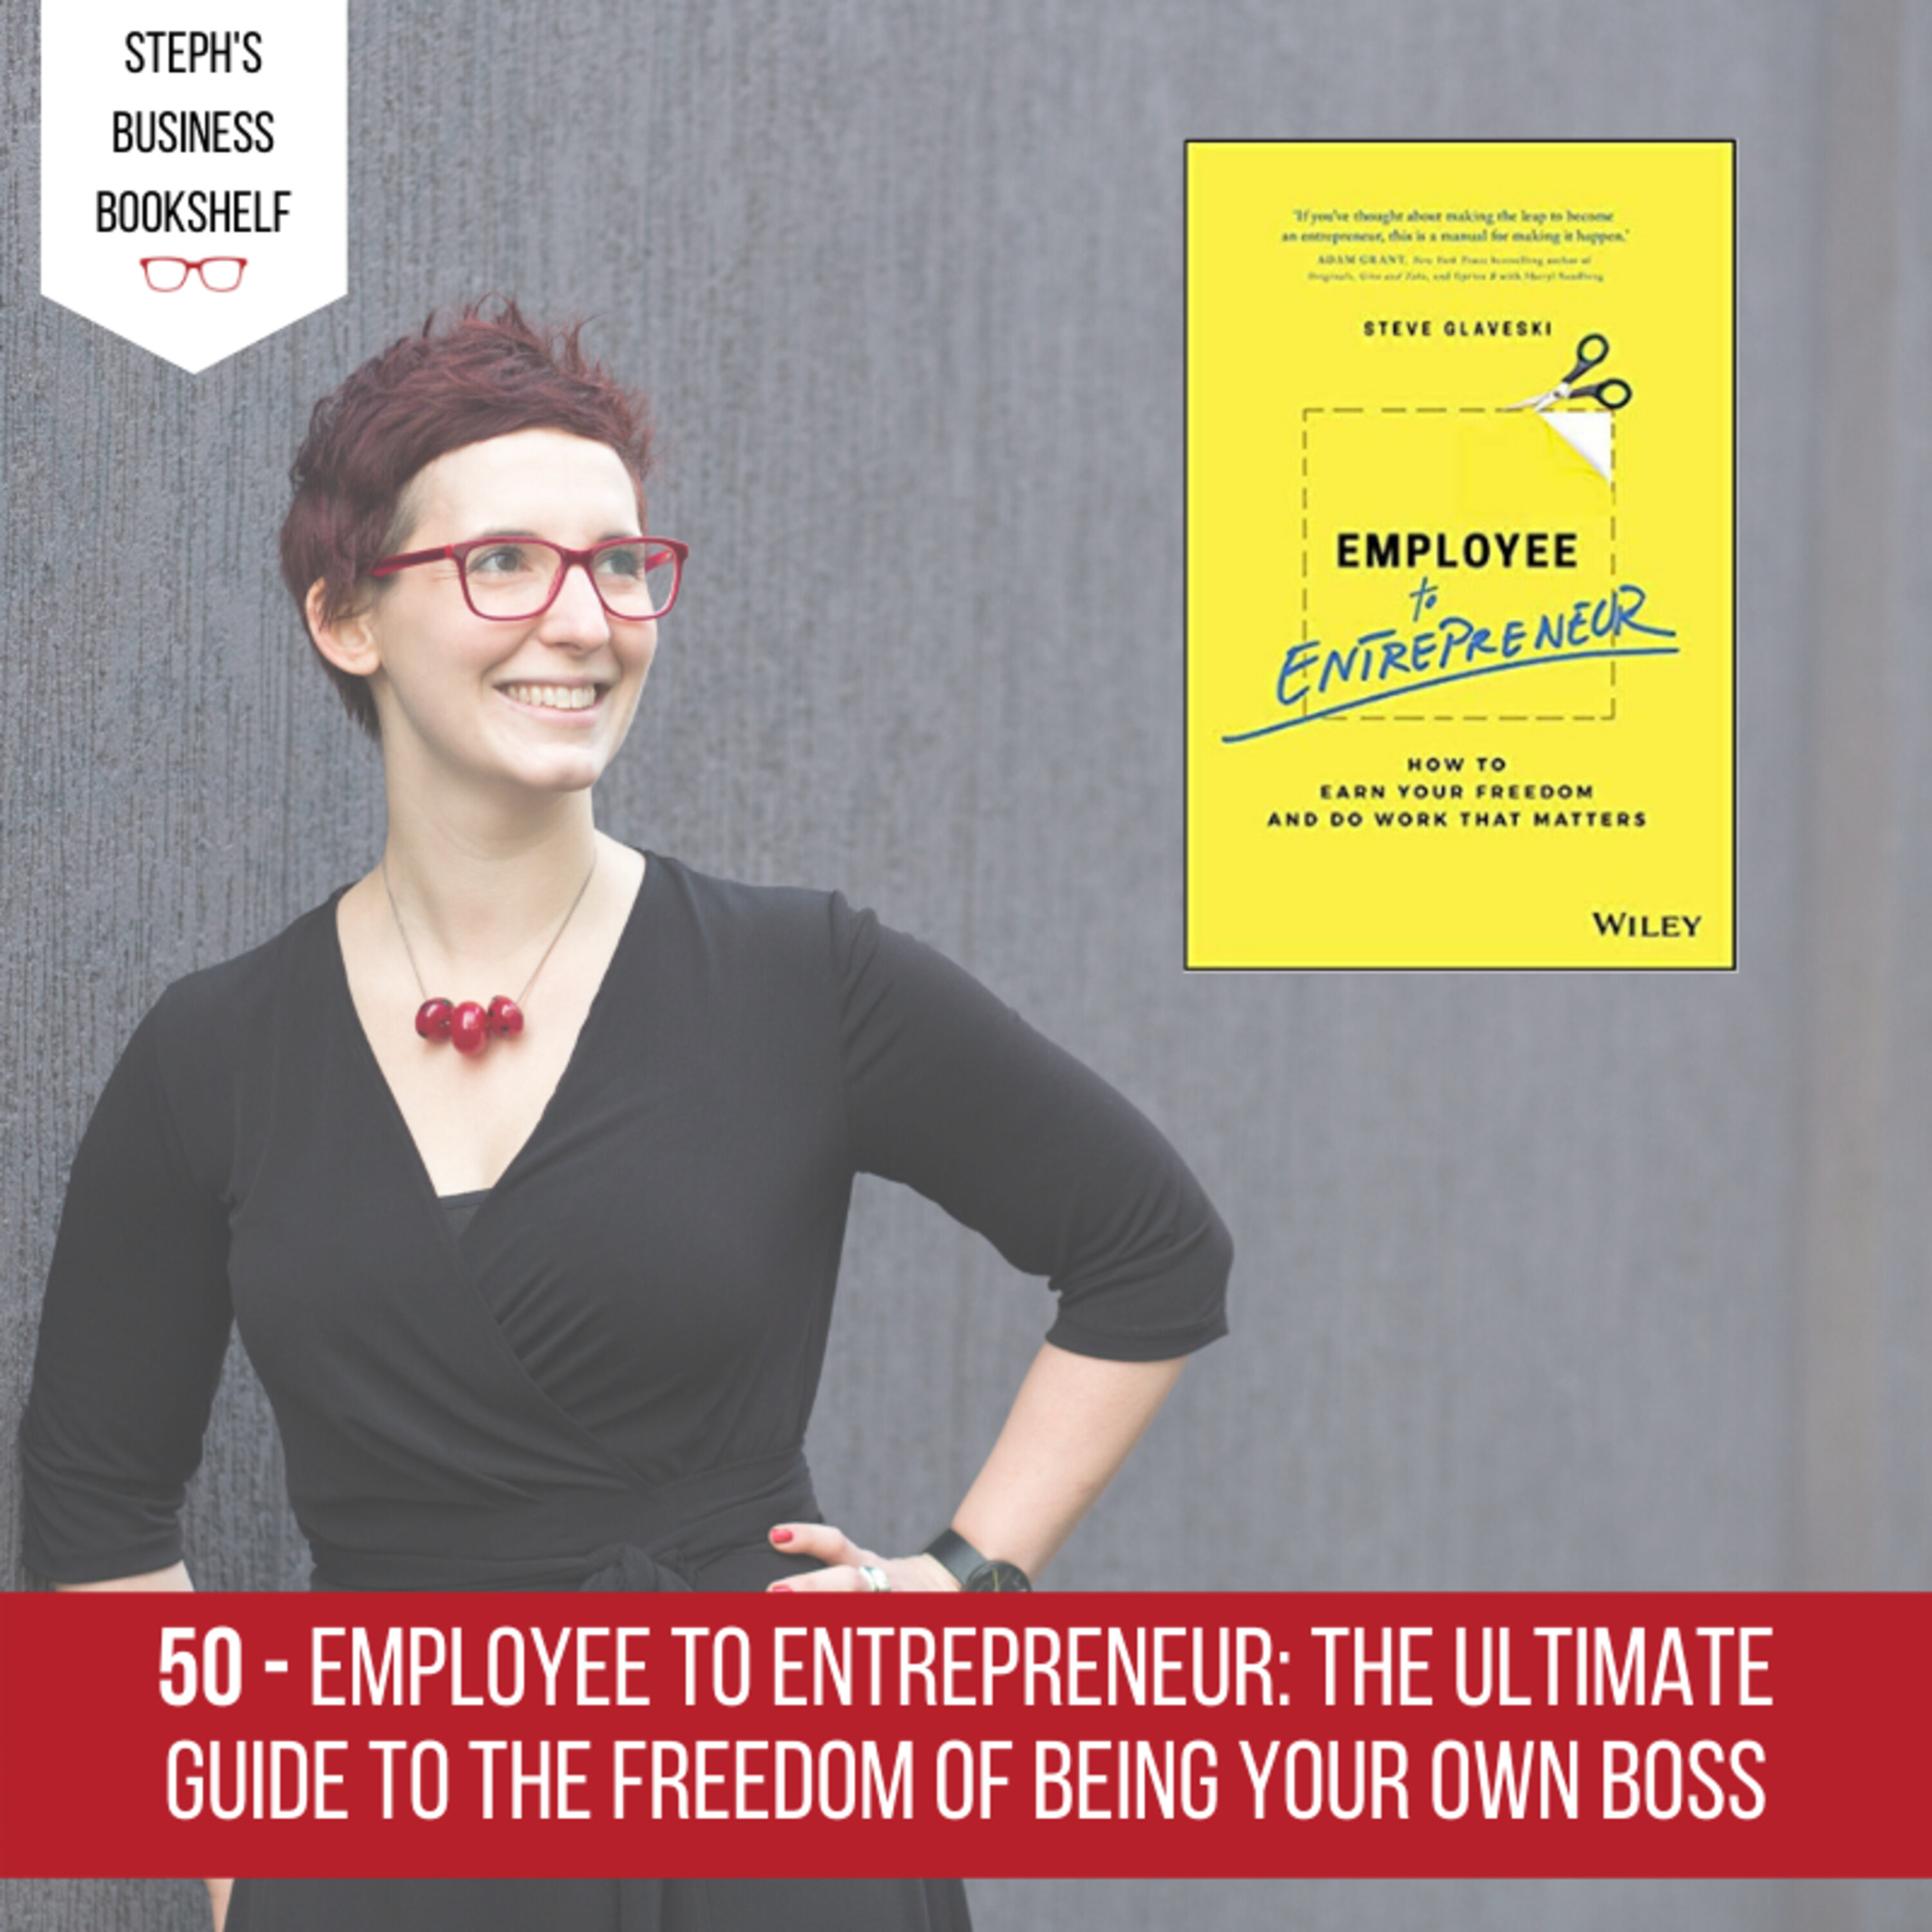 Employee to Entrepreneur by Steve Glaveski: The ultimate guide to the freedom of being your own boss Image